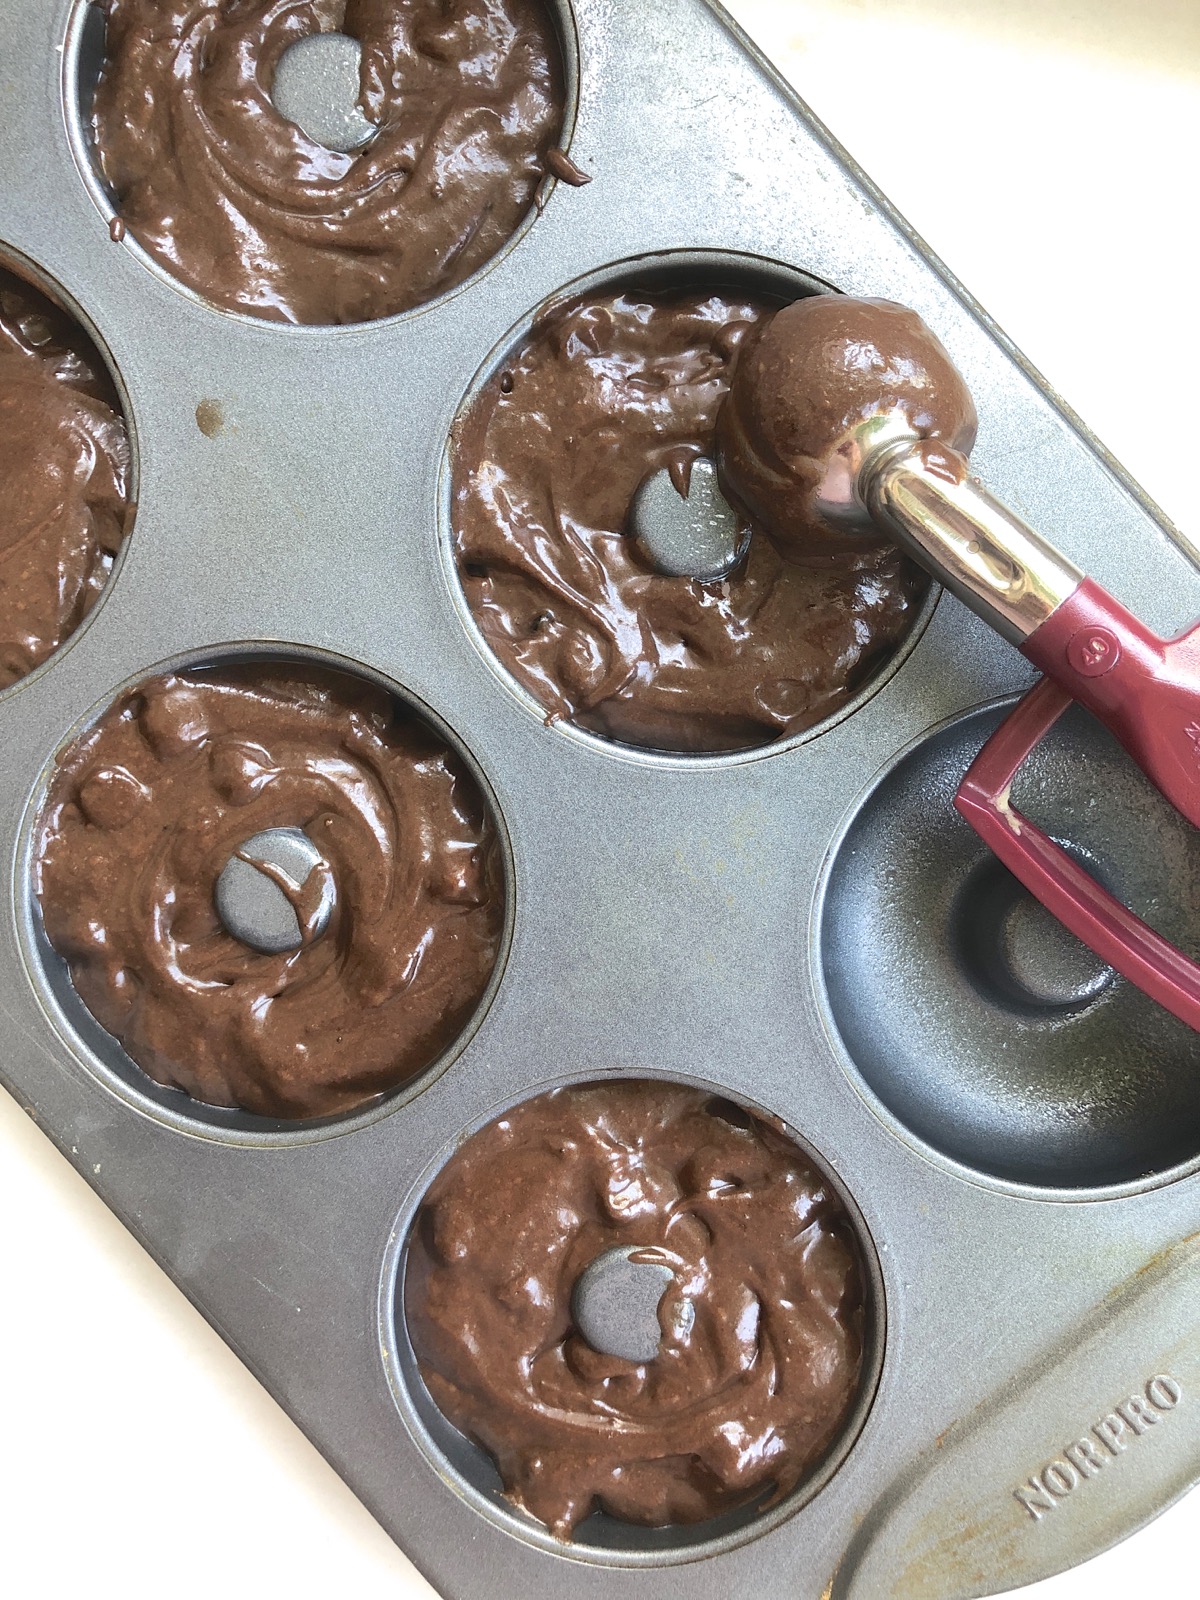 Chocolate doughnut batter scooped into doughnut pans using a cookie scoop.